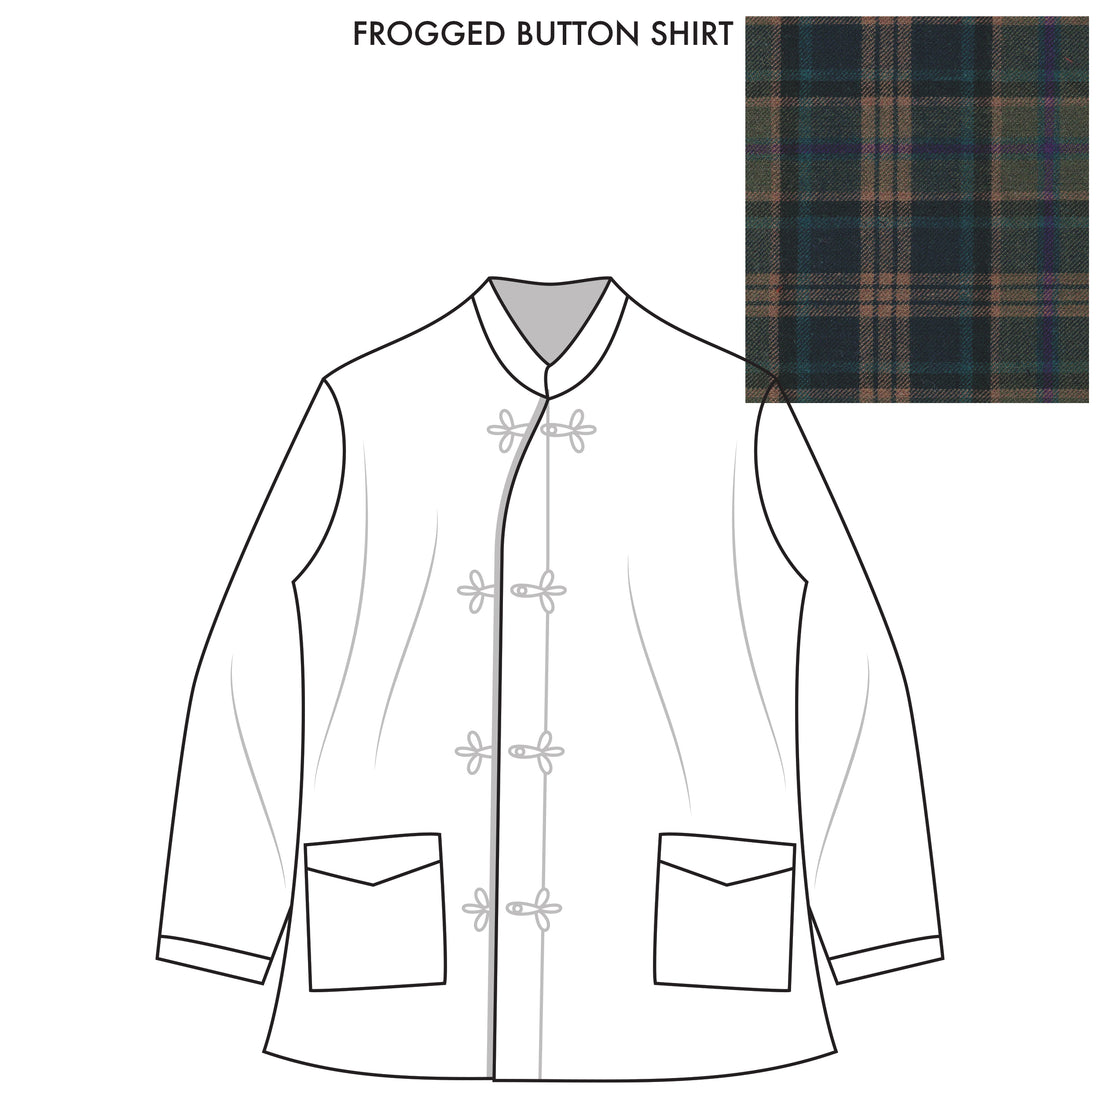 Bryceland’s Frogged Button Shirt Made-to-order Green Plaid